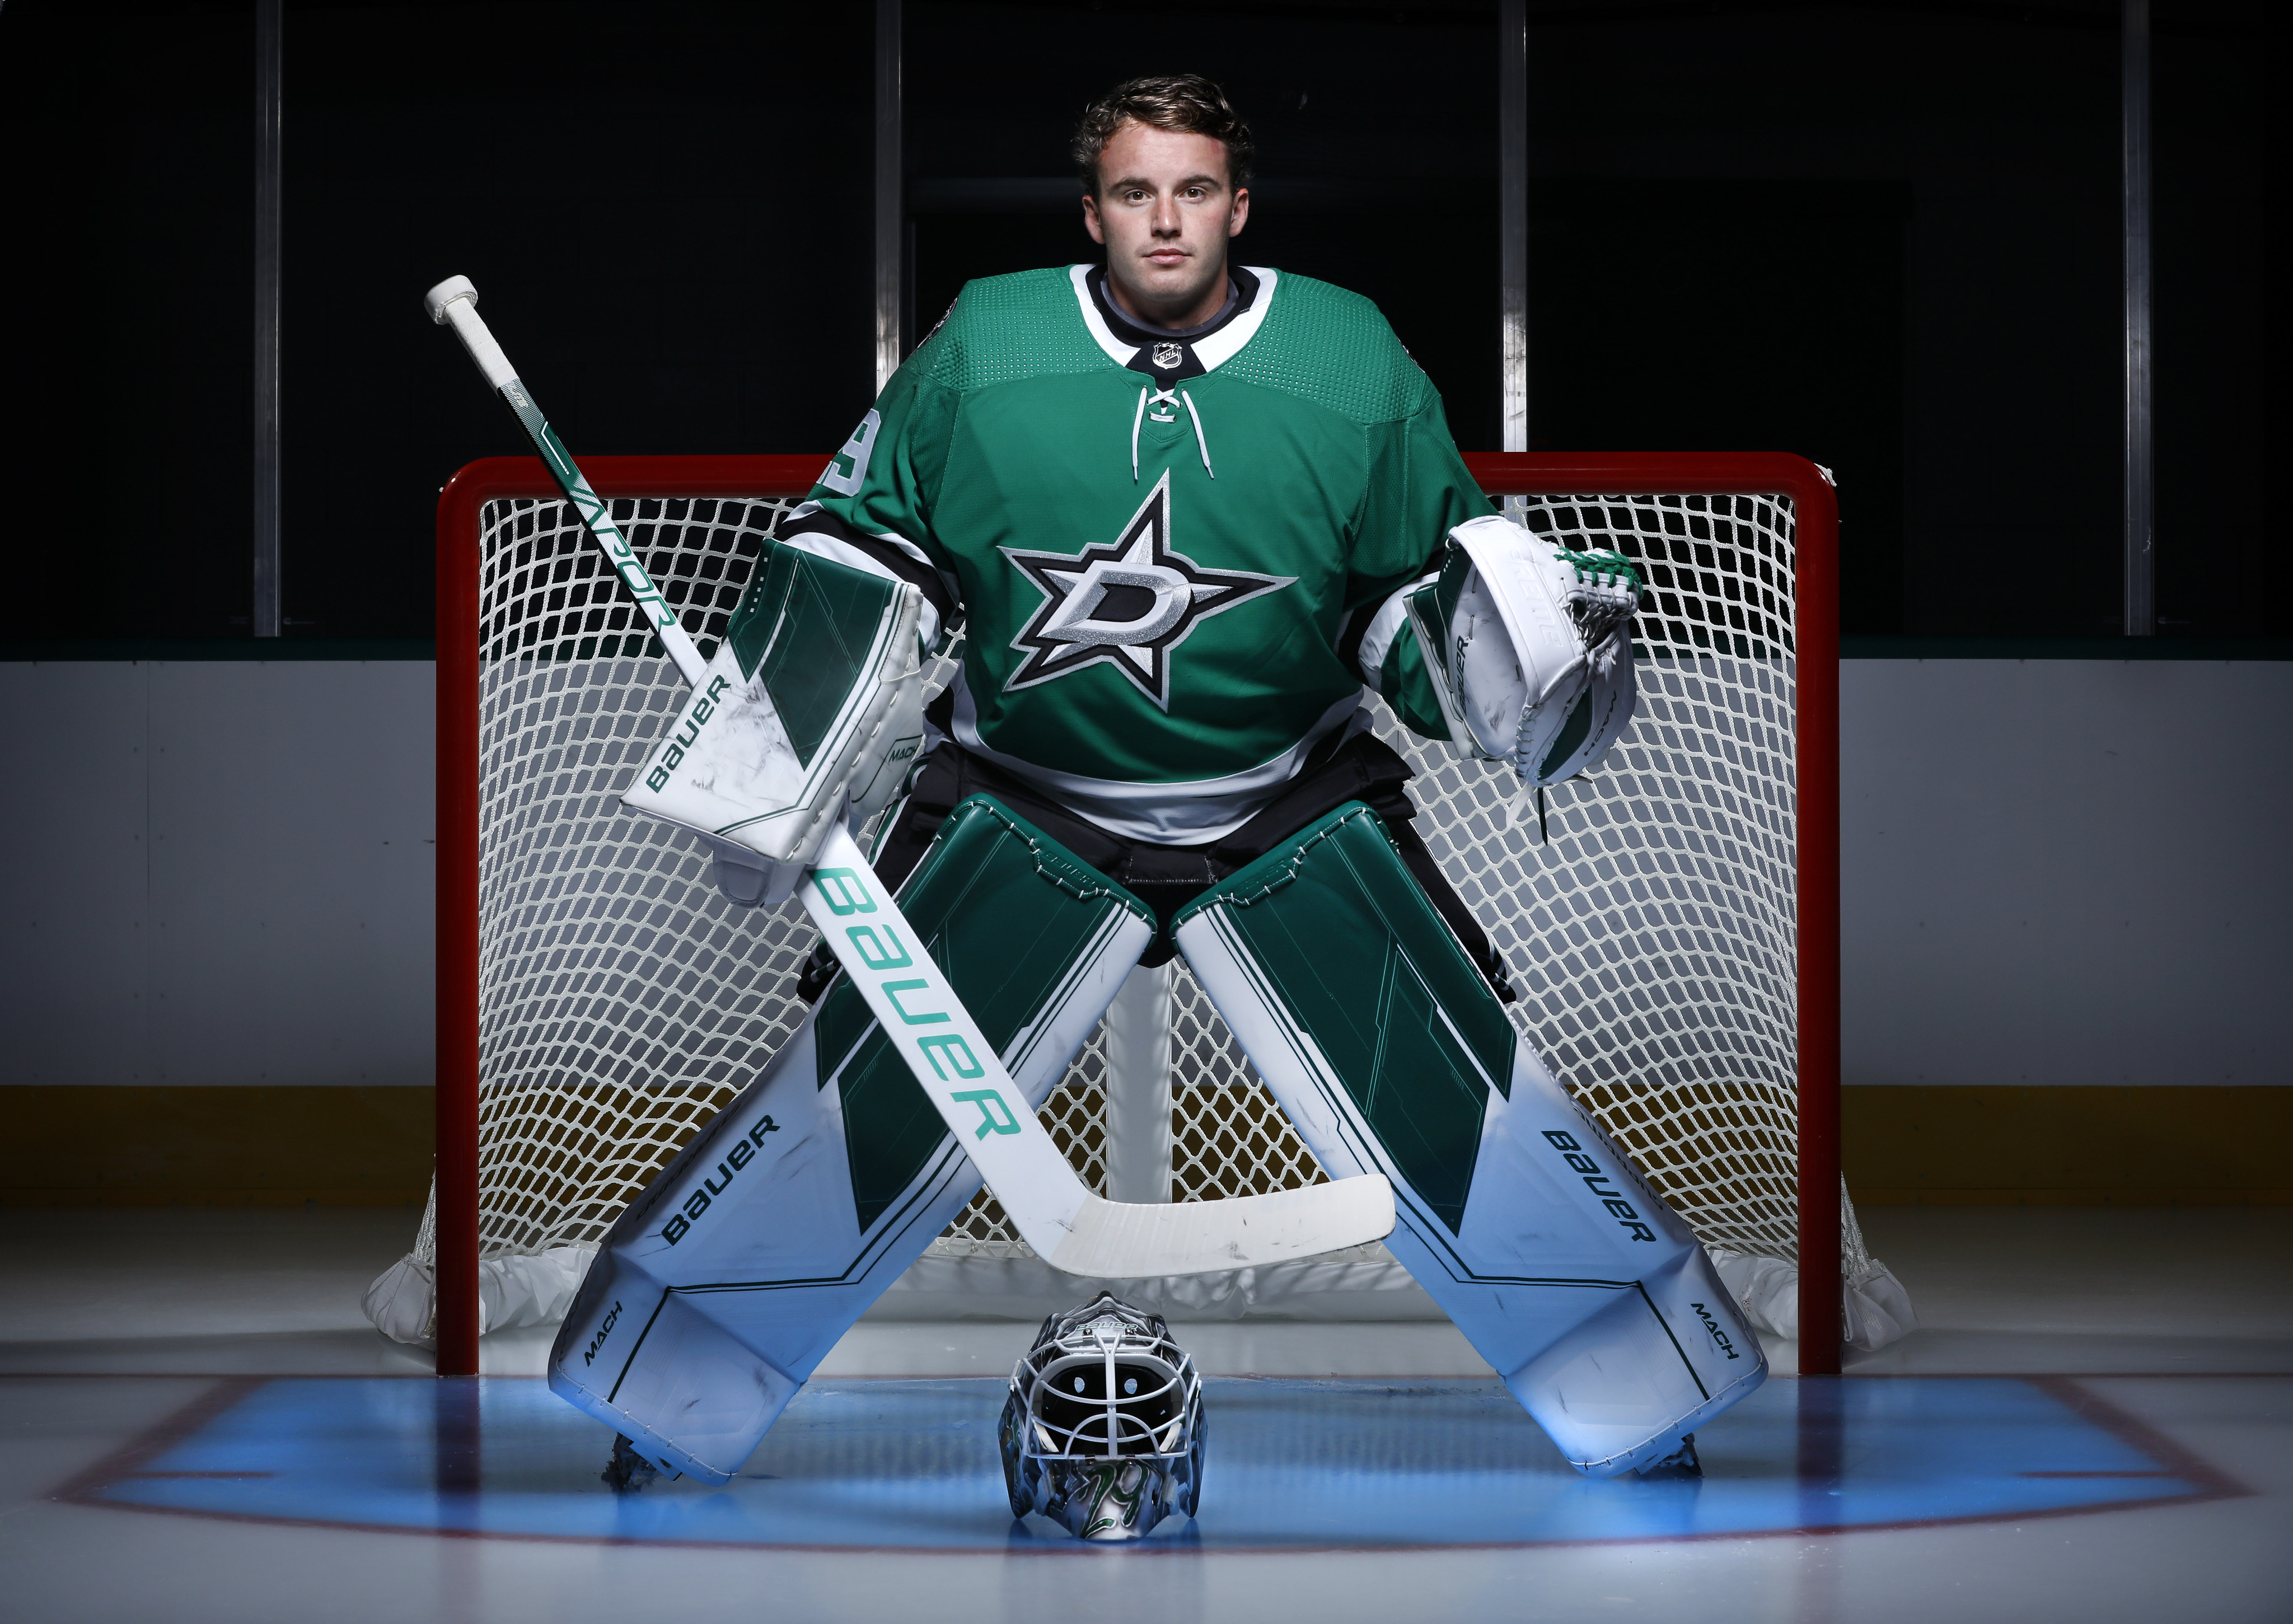 With Jake Oettinger out, Stars backup goalies tasked with stalling